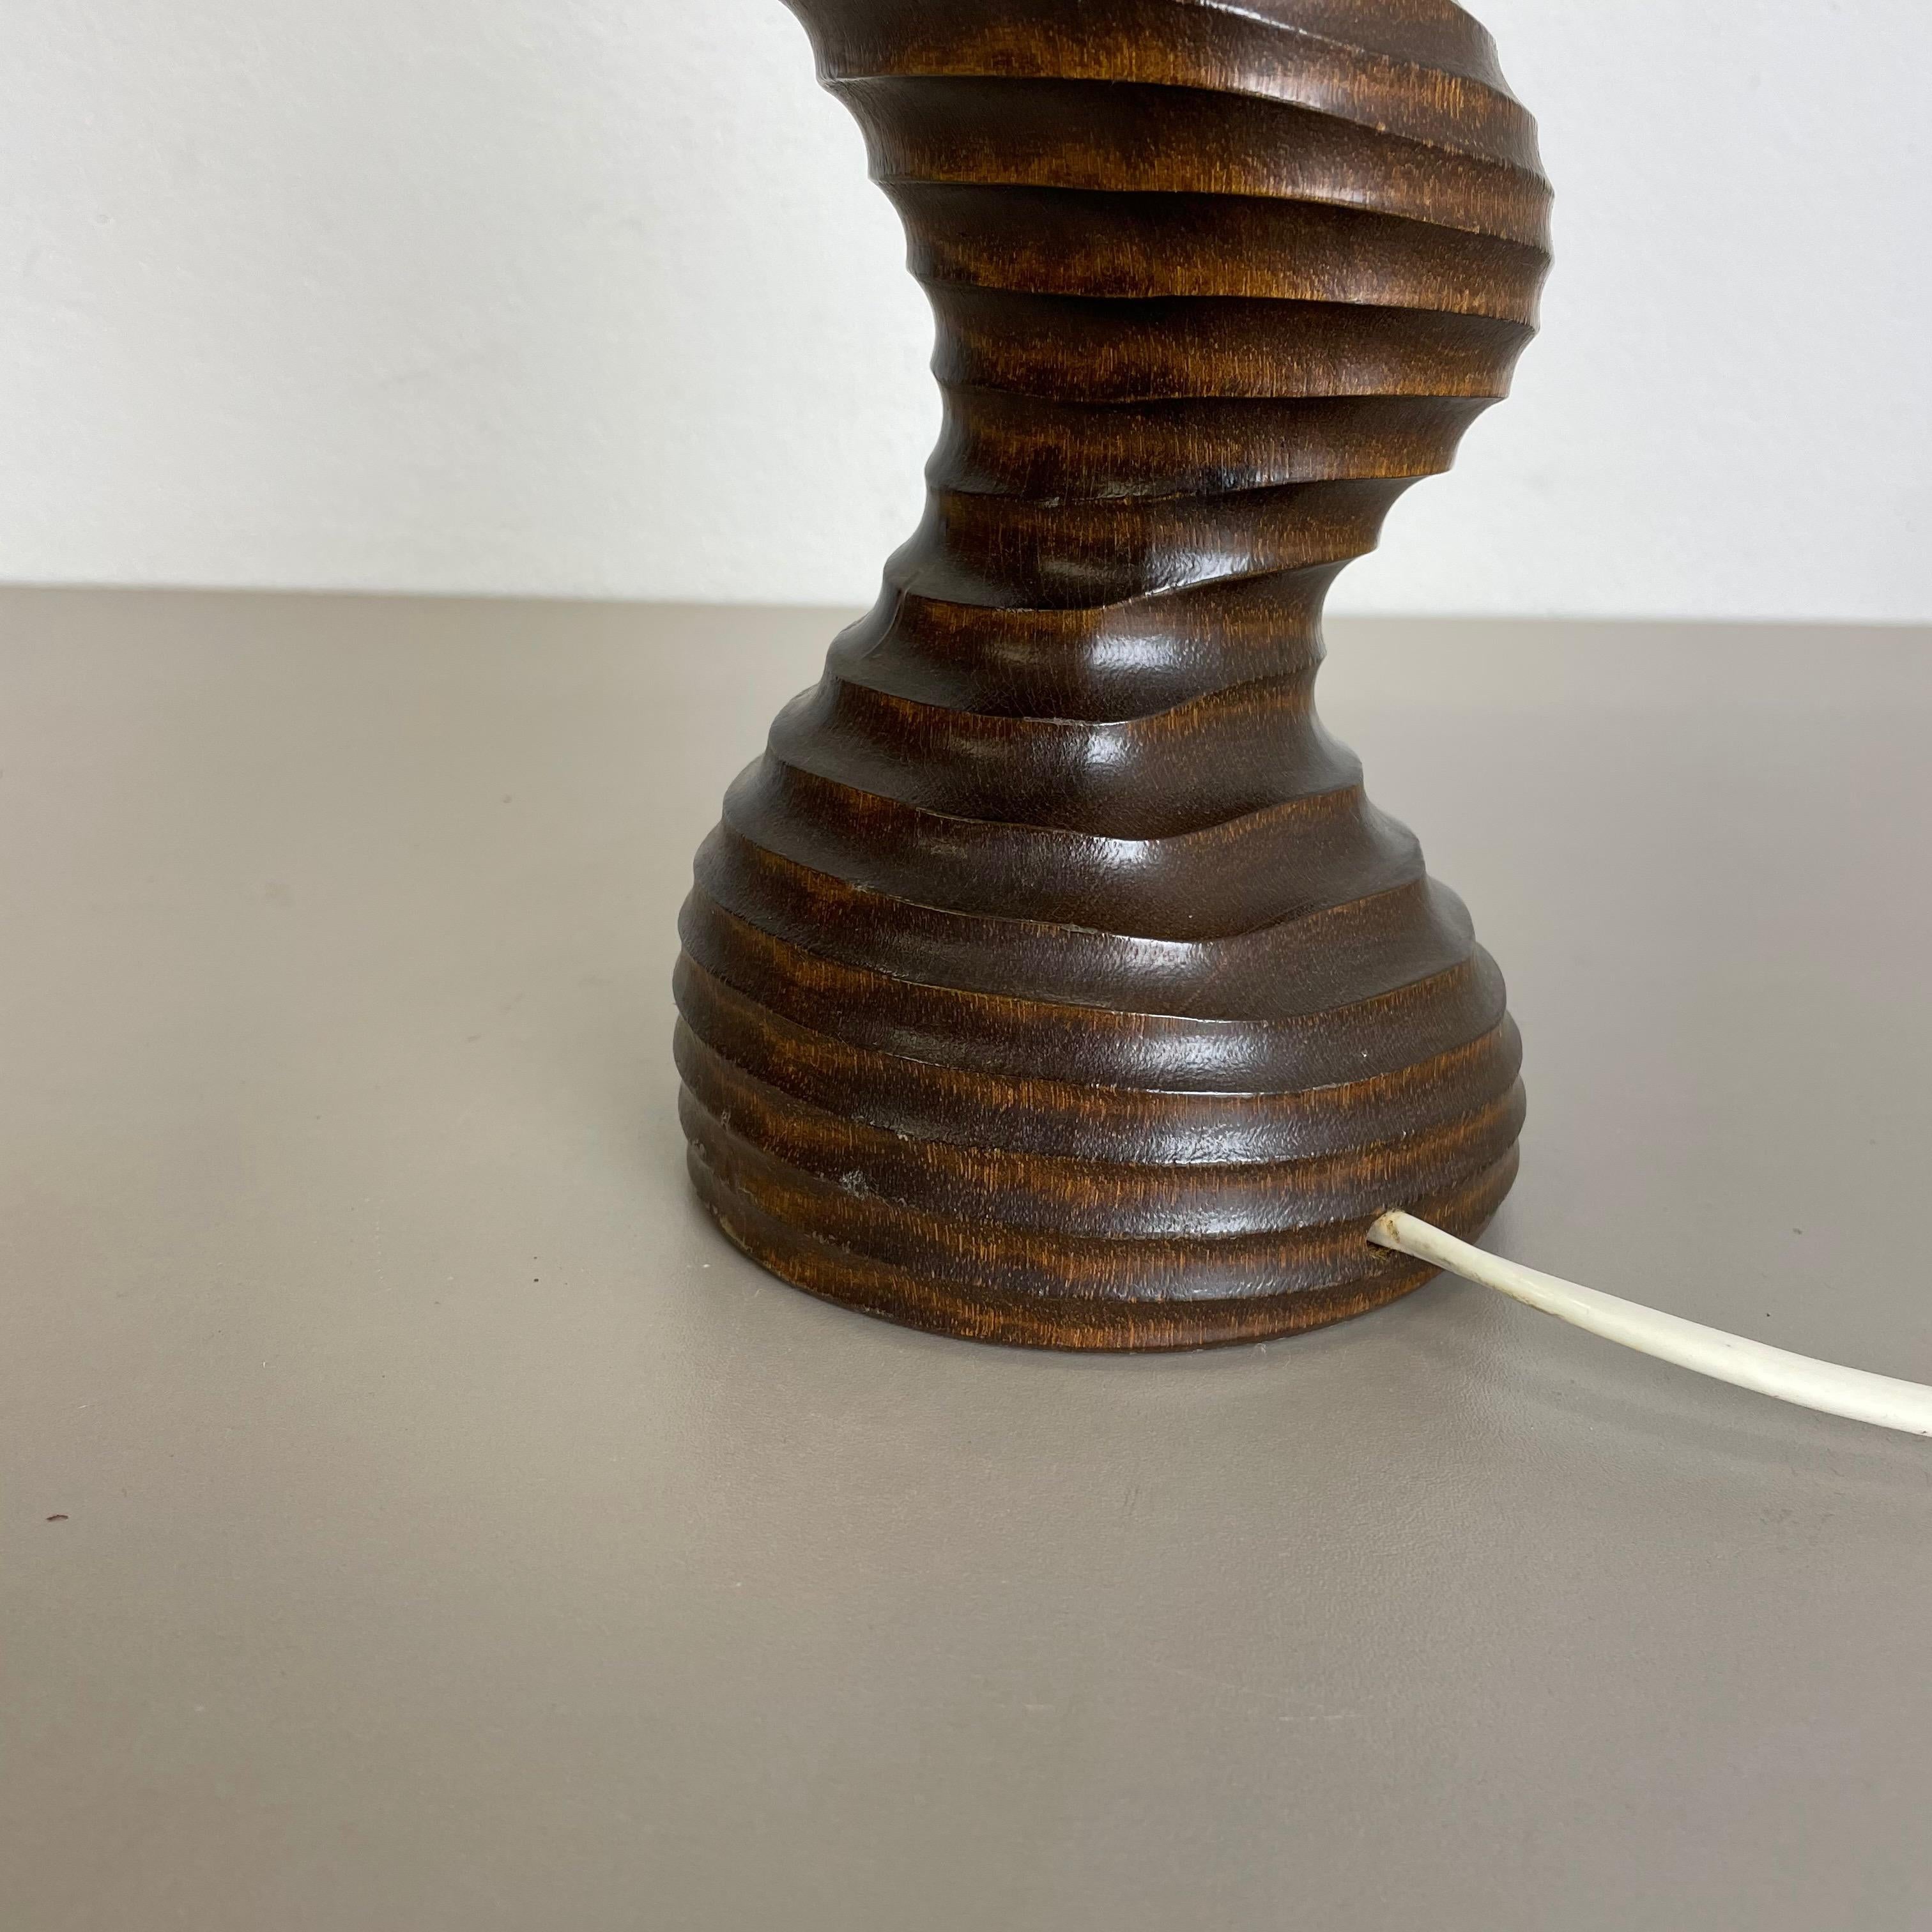 Glass Large Organic Sculptural Wooden Table Light Made Temde Lights, Germany, 1970s For Sale